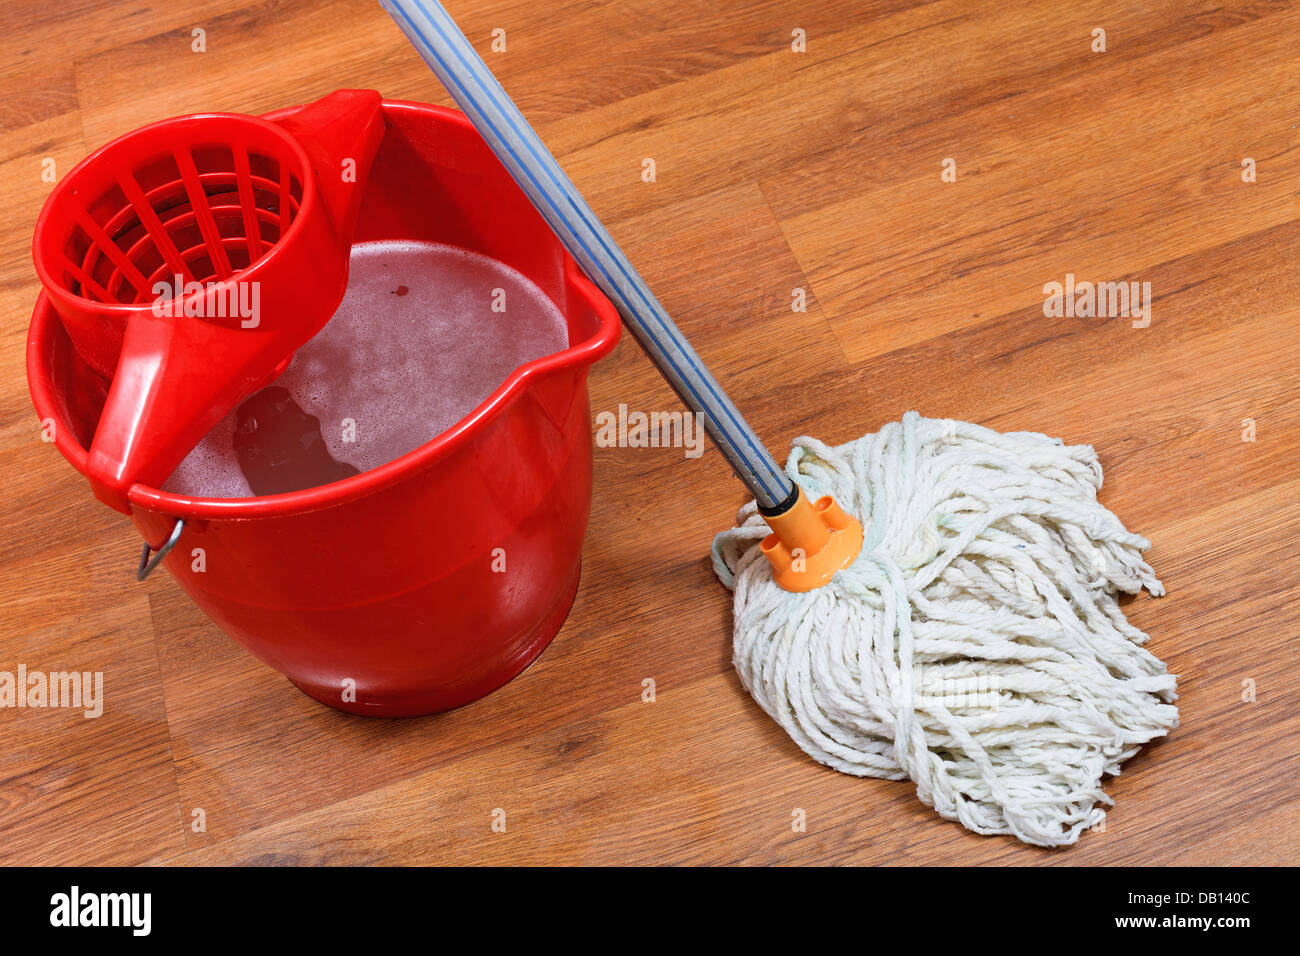 https://c8.alamy.com/comp/DB140C/cleaning-of-floors-by-mop-and-red-bucket-with-washing-water-DB140C.jpg